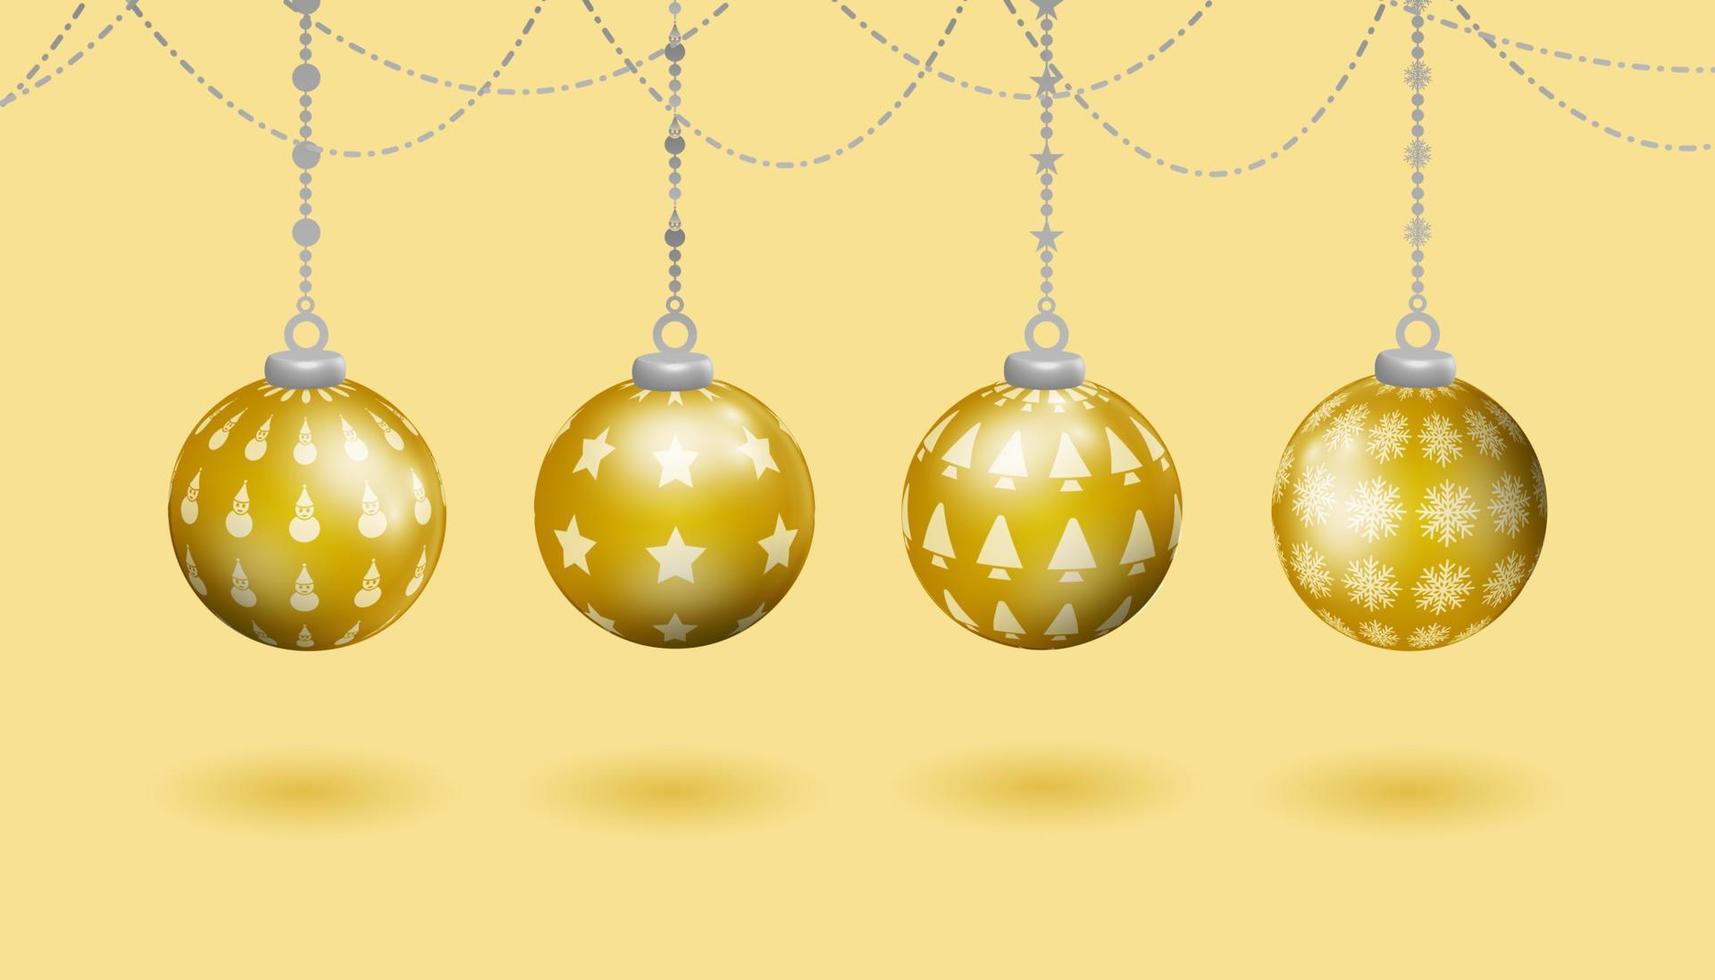 gold realistic hanging ball christmas decoration set, with various patterns of christmas symbols, christmas tree, snowman, stars, snowflakes vector